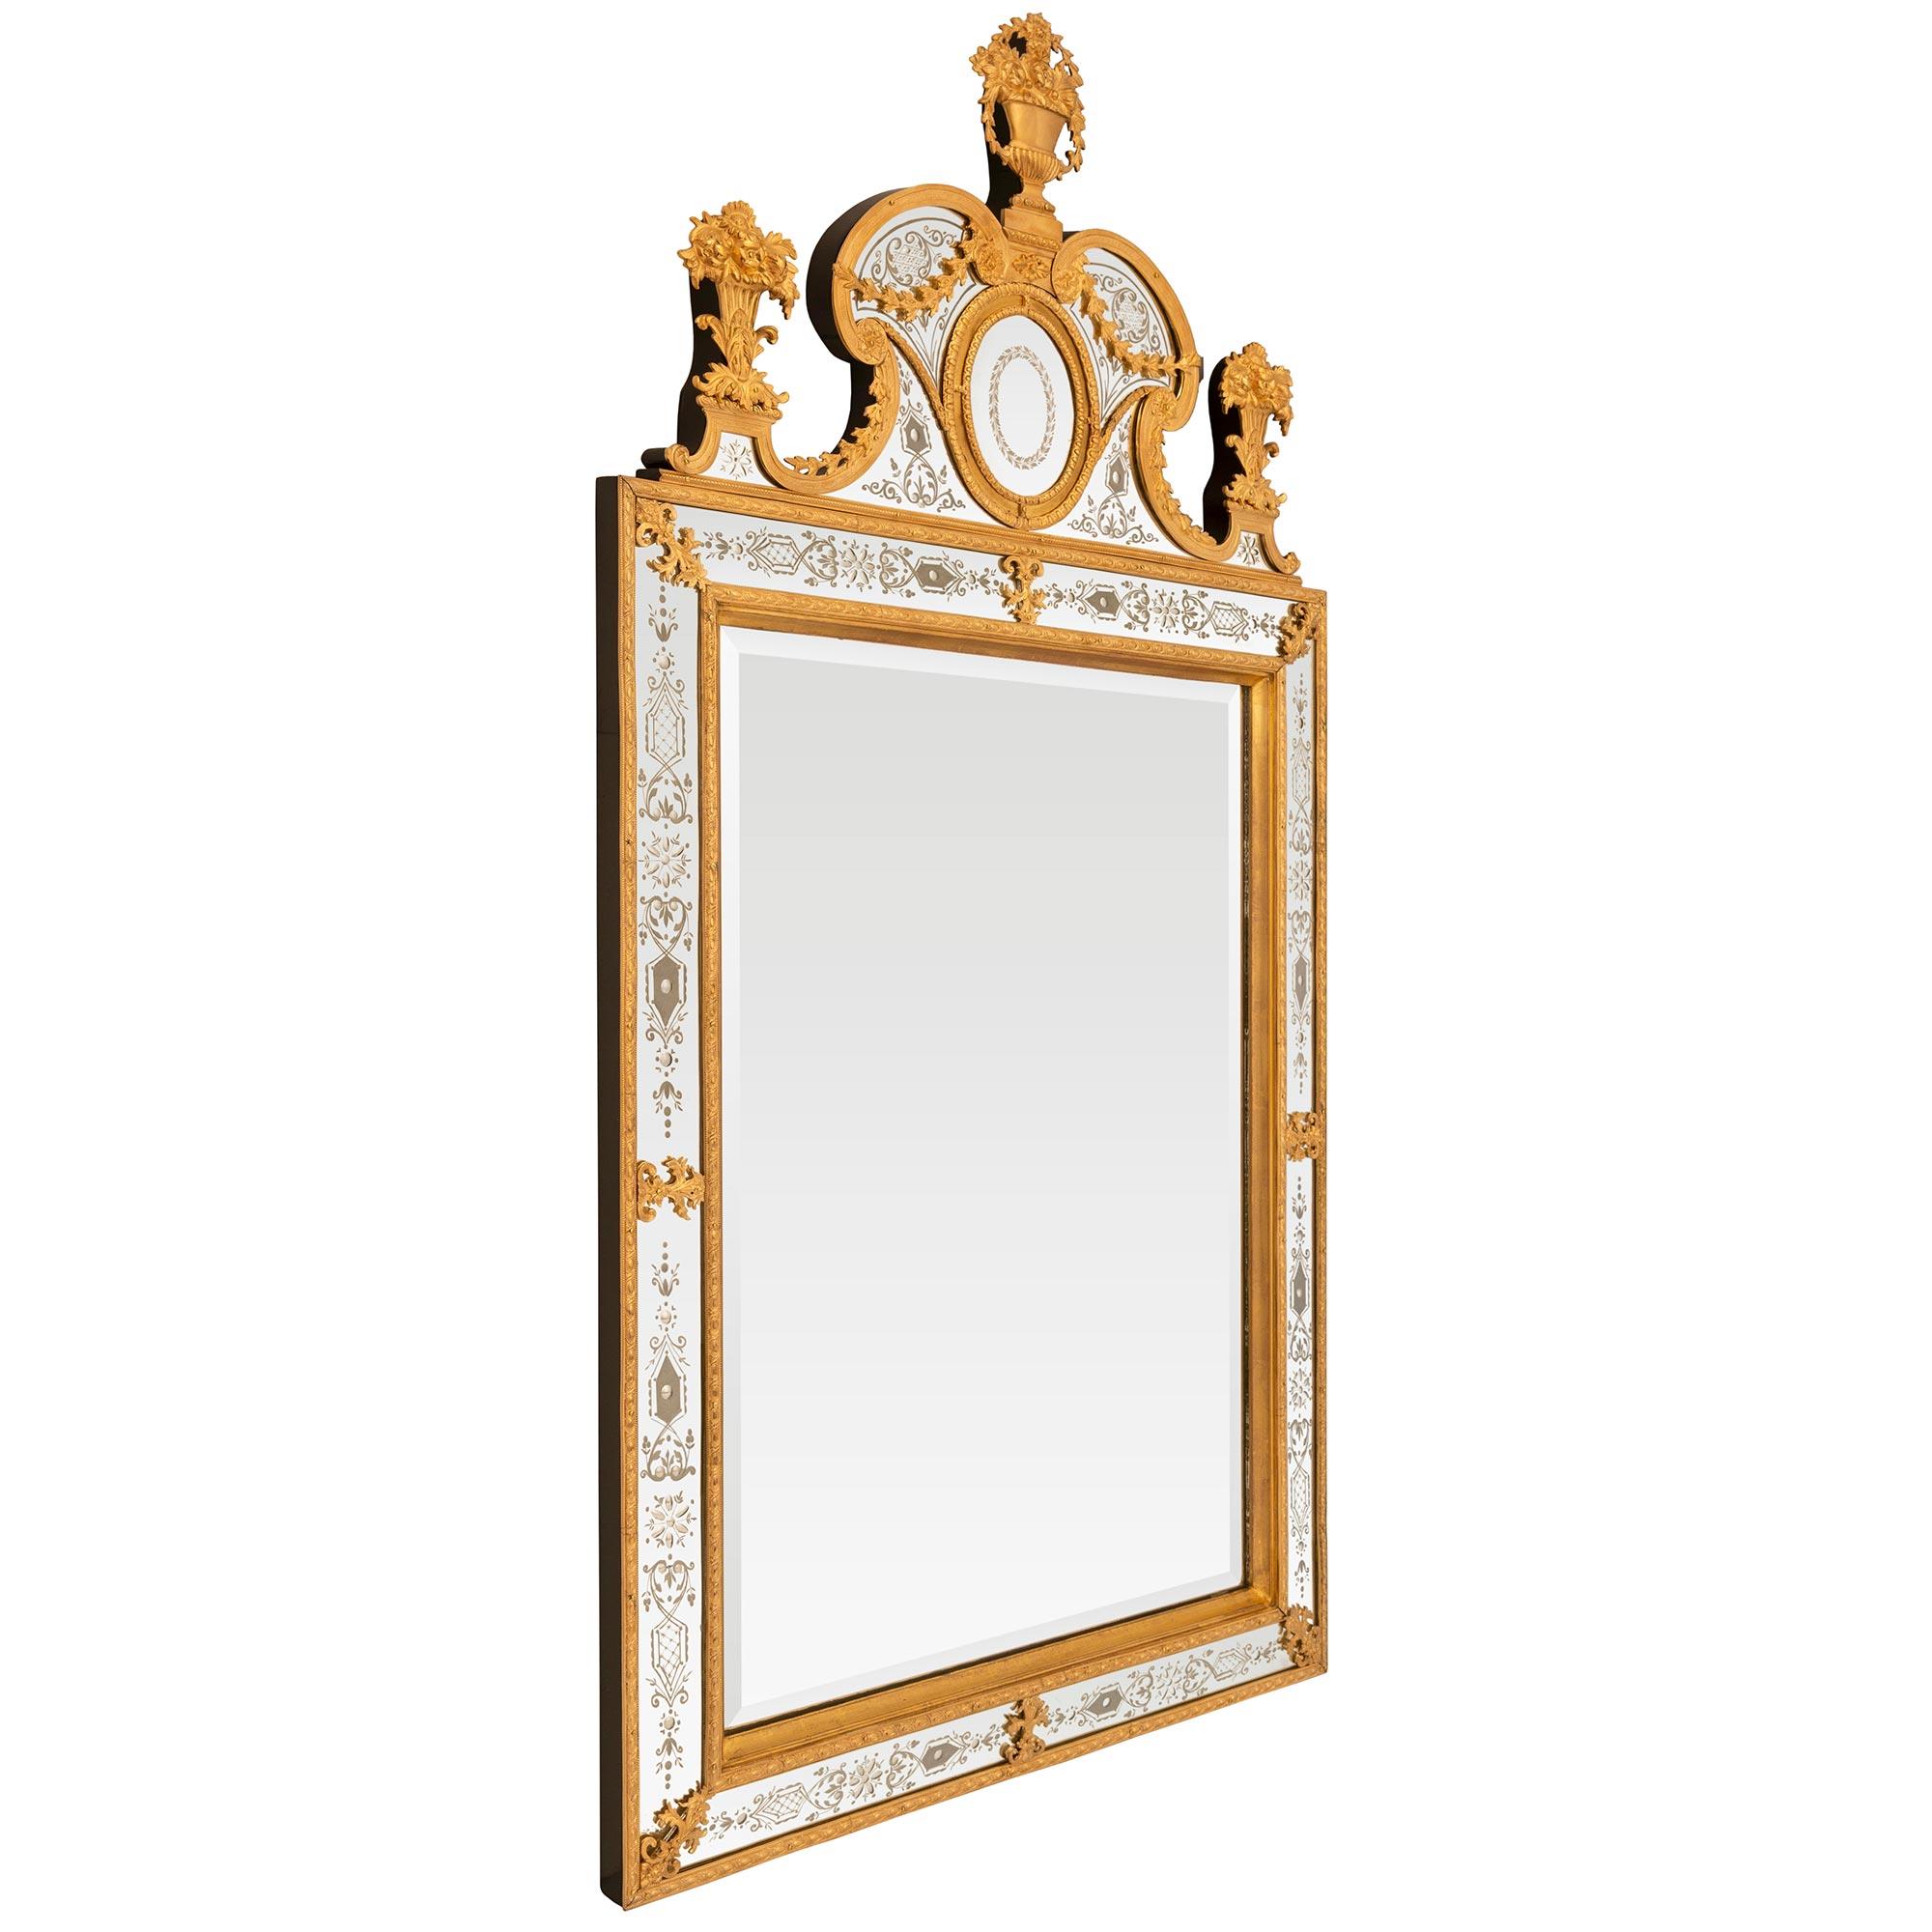 A sensational and high quality Swedish early 19th century Neo-Classical st. etched mirror plate, Giltwood and Ormolu mirror. The original double frame vertical beveled mirror plate is framed within a concave Giltwood frame and an egg and dart Ormolu